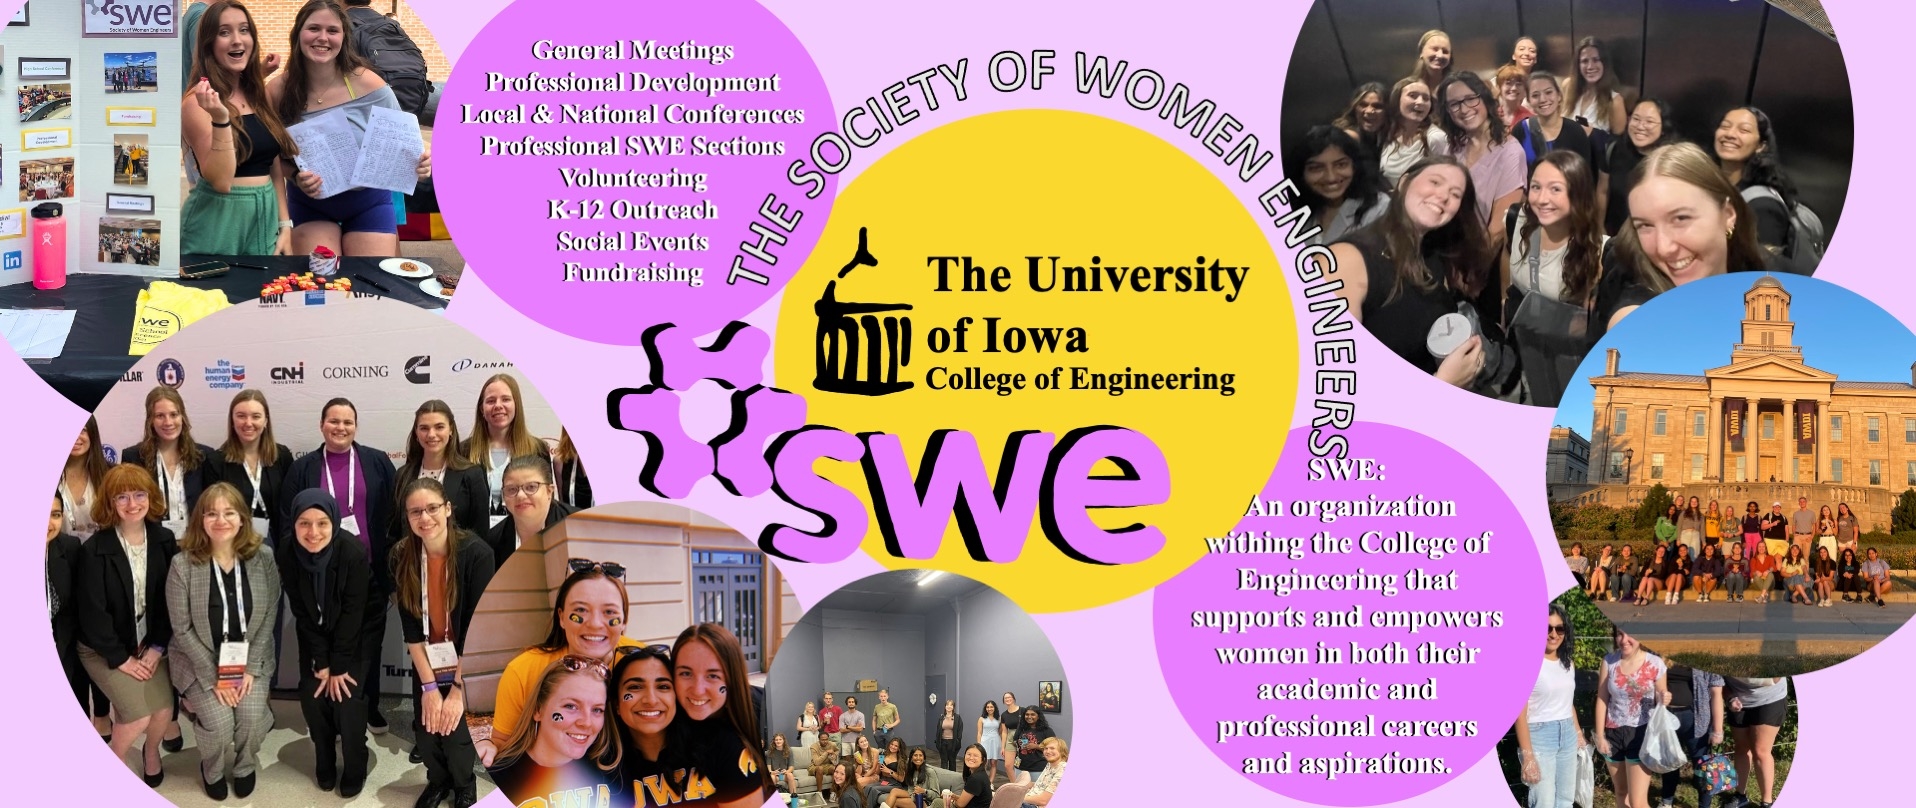 Society of Women Engineers (SWE); An organization within the College of Engineering that supports and empowers women in both their academic and professional careers and aspirations.; General Meetings Professional Development  Volunteering K-12 Outreach Social Events Fundraising Local and National Conferences Professional SWE Sections 